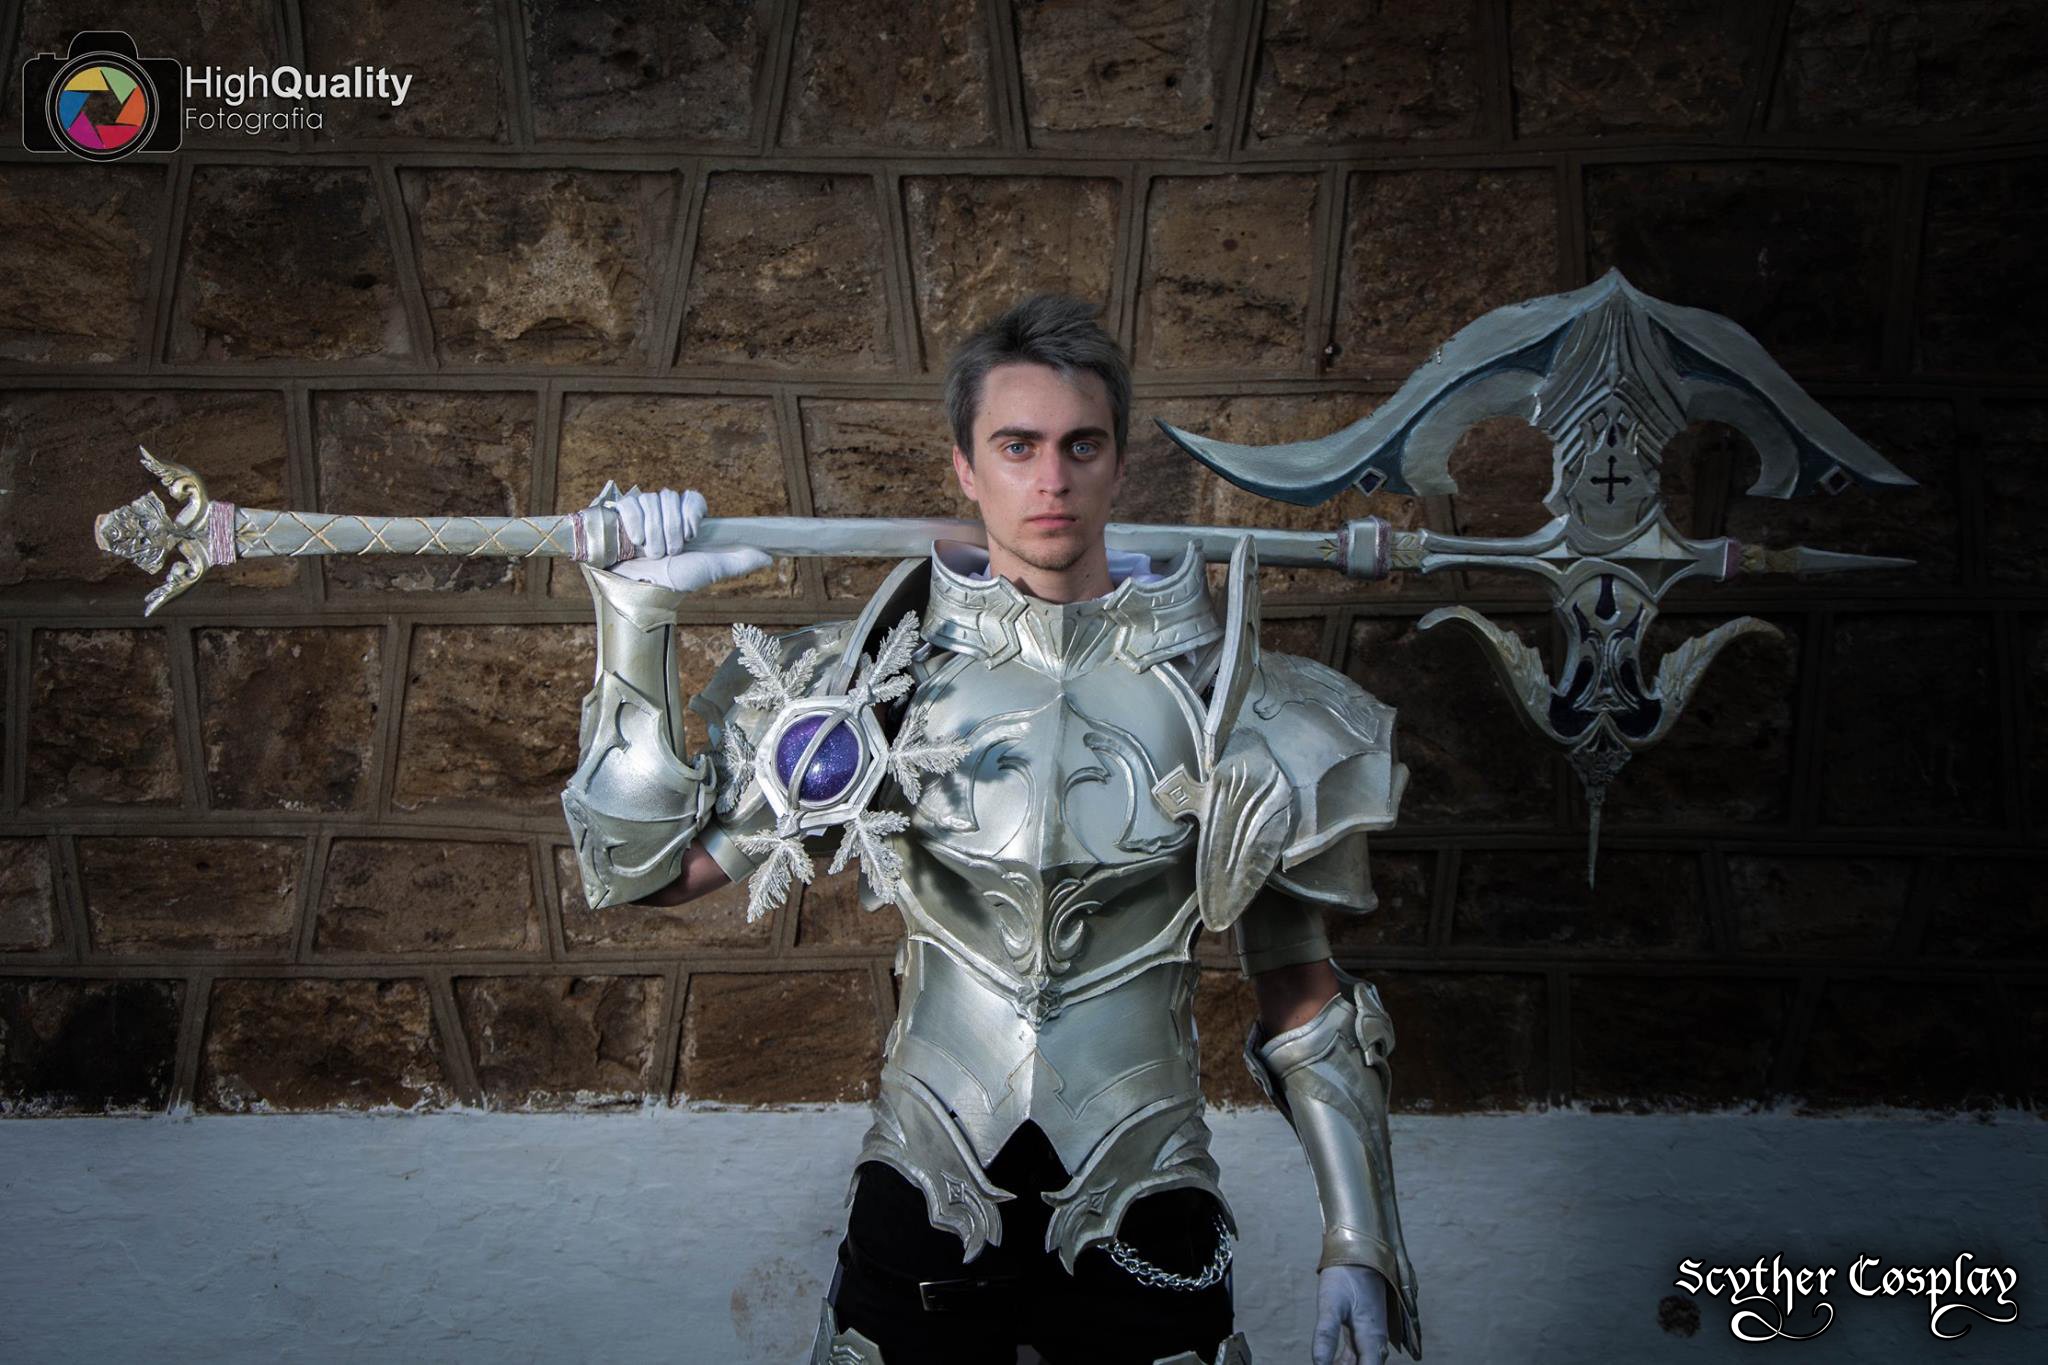 People 2048x1365 Aion Online cosplay axes armor knight gray hair